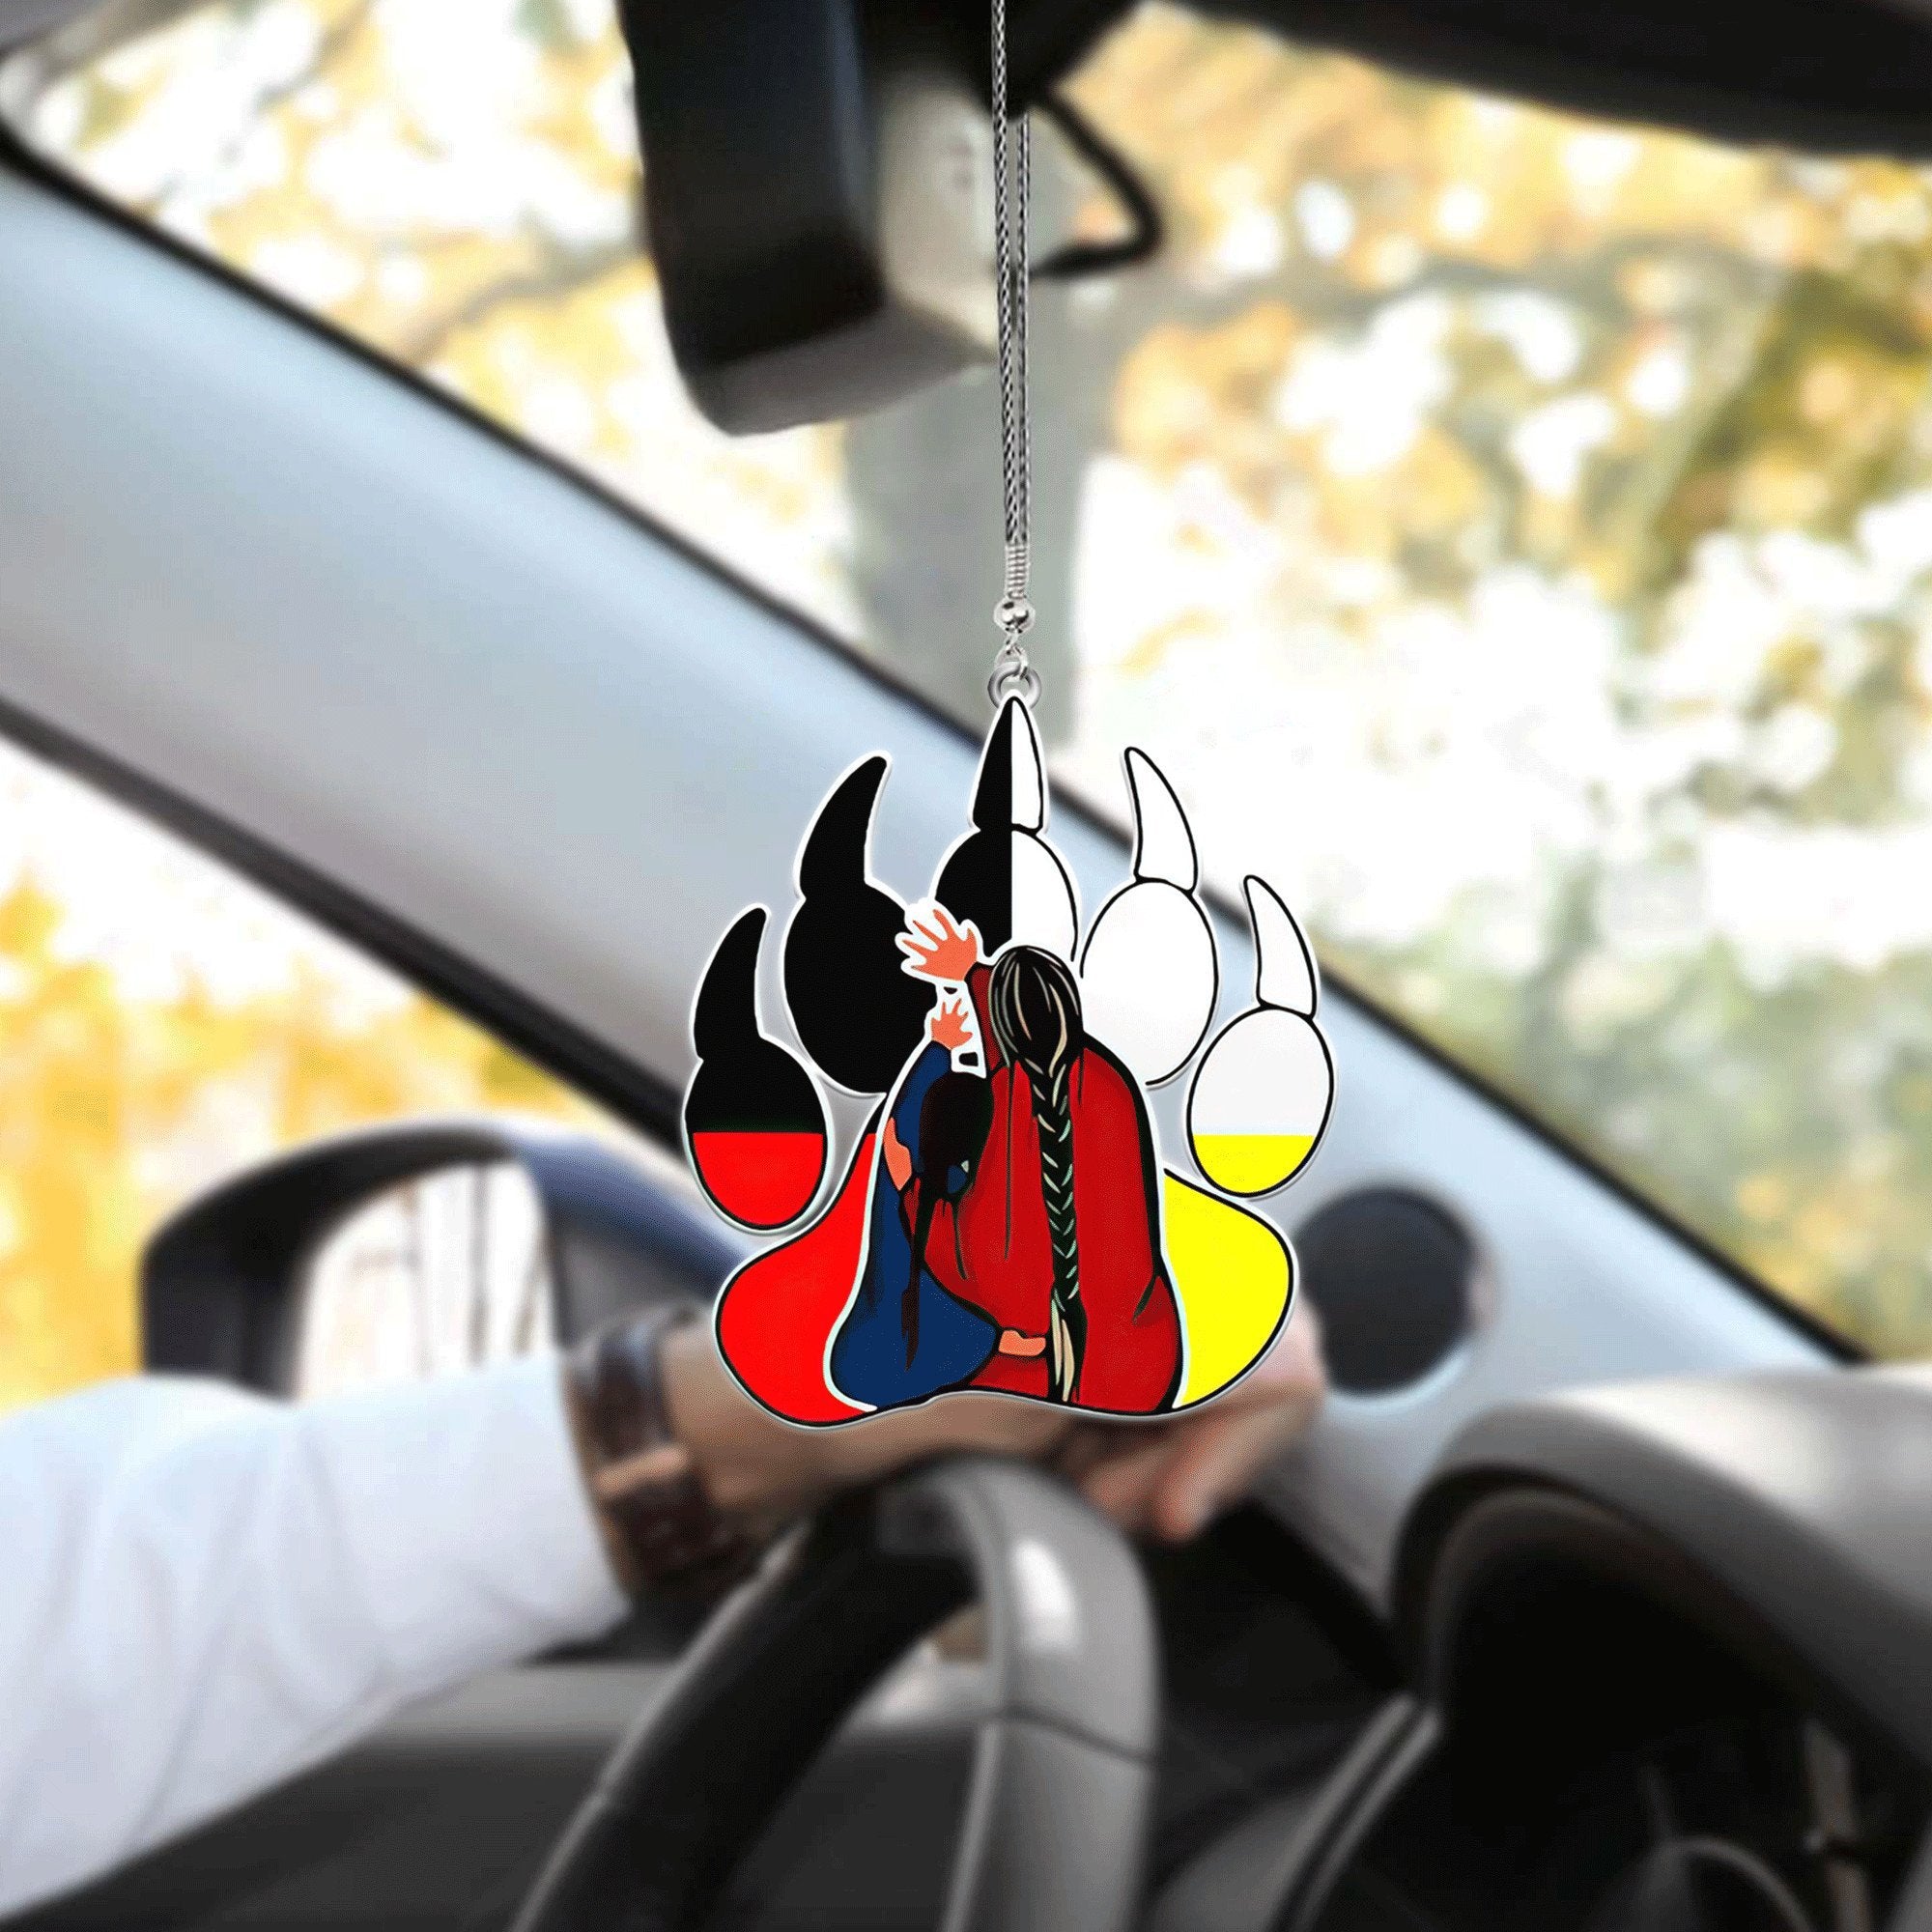 Native American Car Hanging Ornament/ Best Ornament For Cars